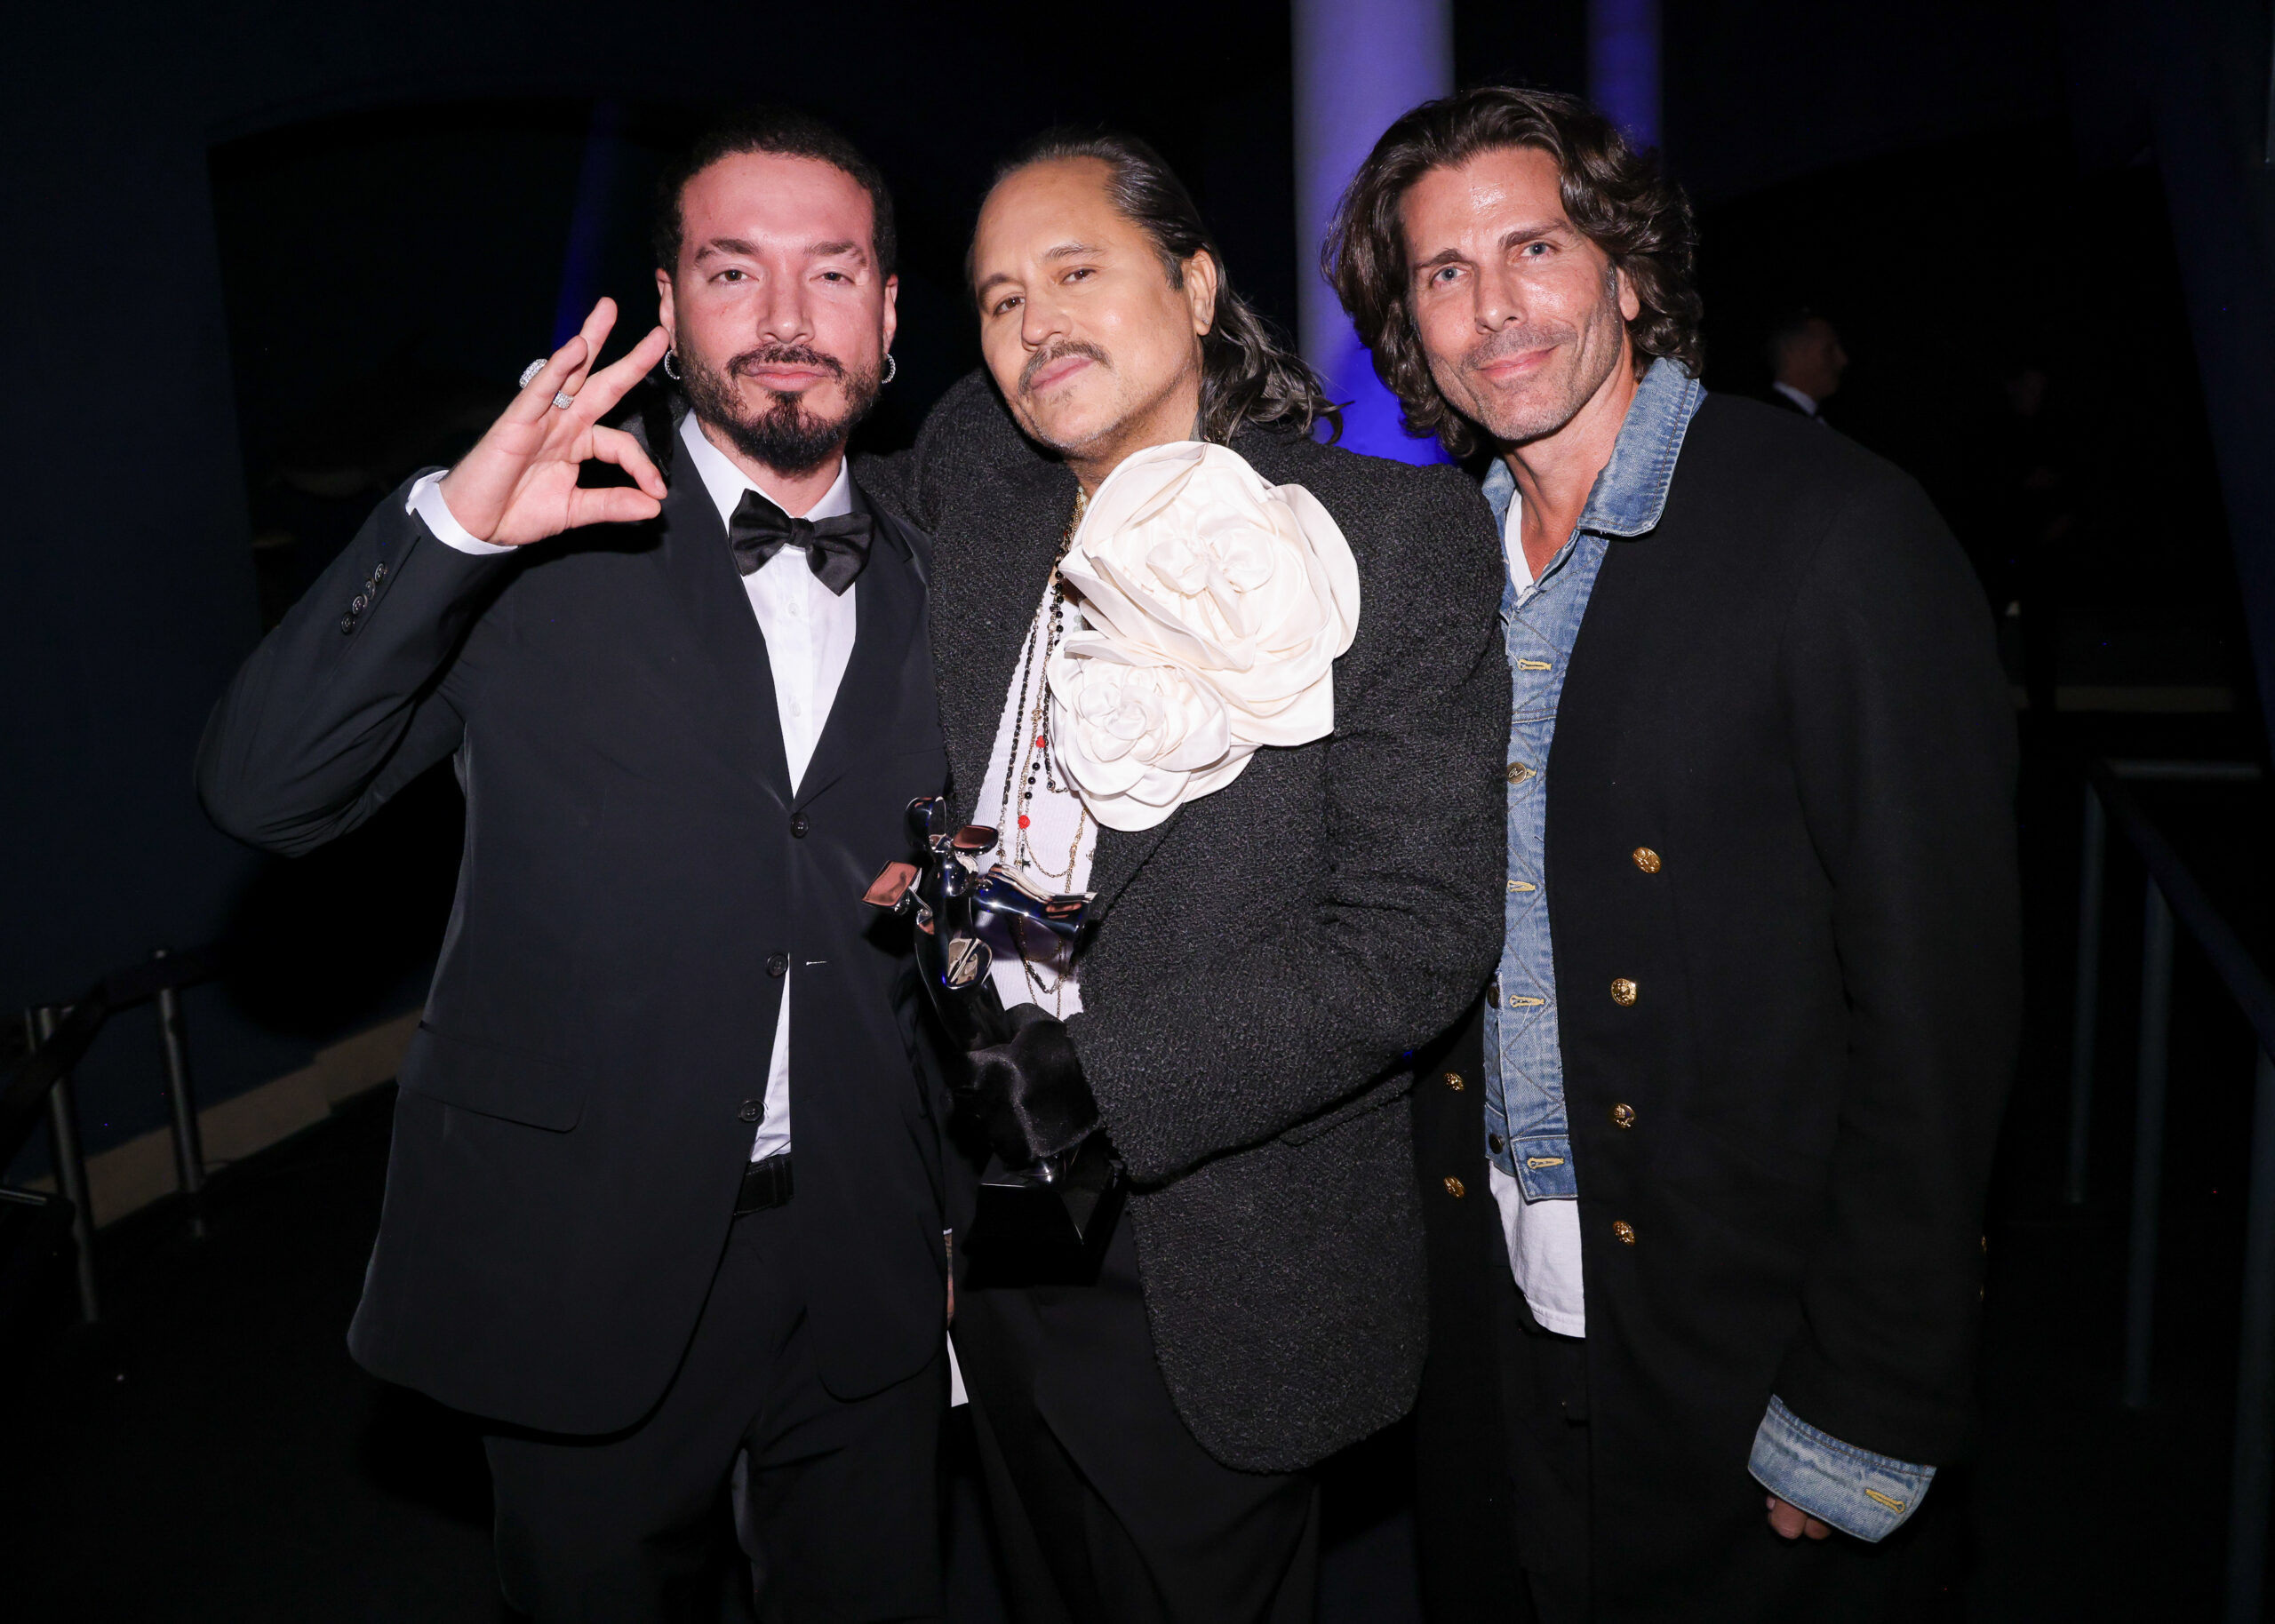 J Balvin, Willy Chavarria, and Greg Lauren share a candid moment, reflecting the camaraderie and eclectic spirit of the fashion world at the CFDA Fashion Awards.